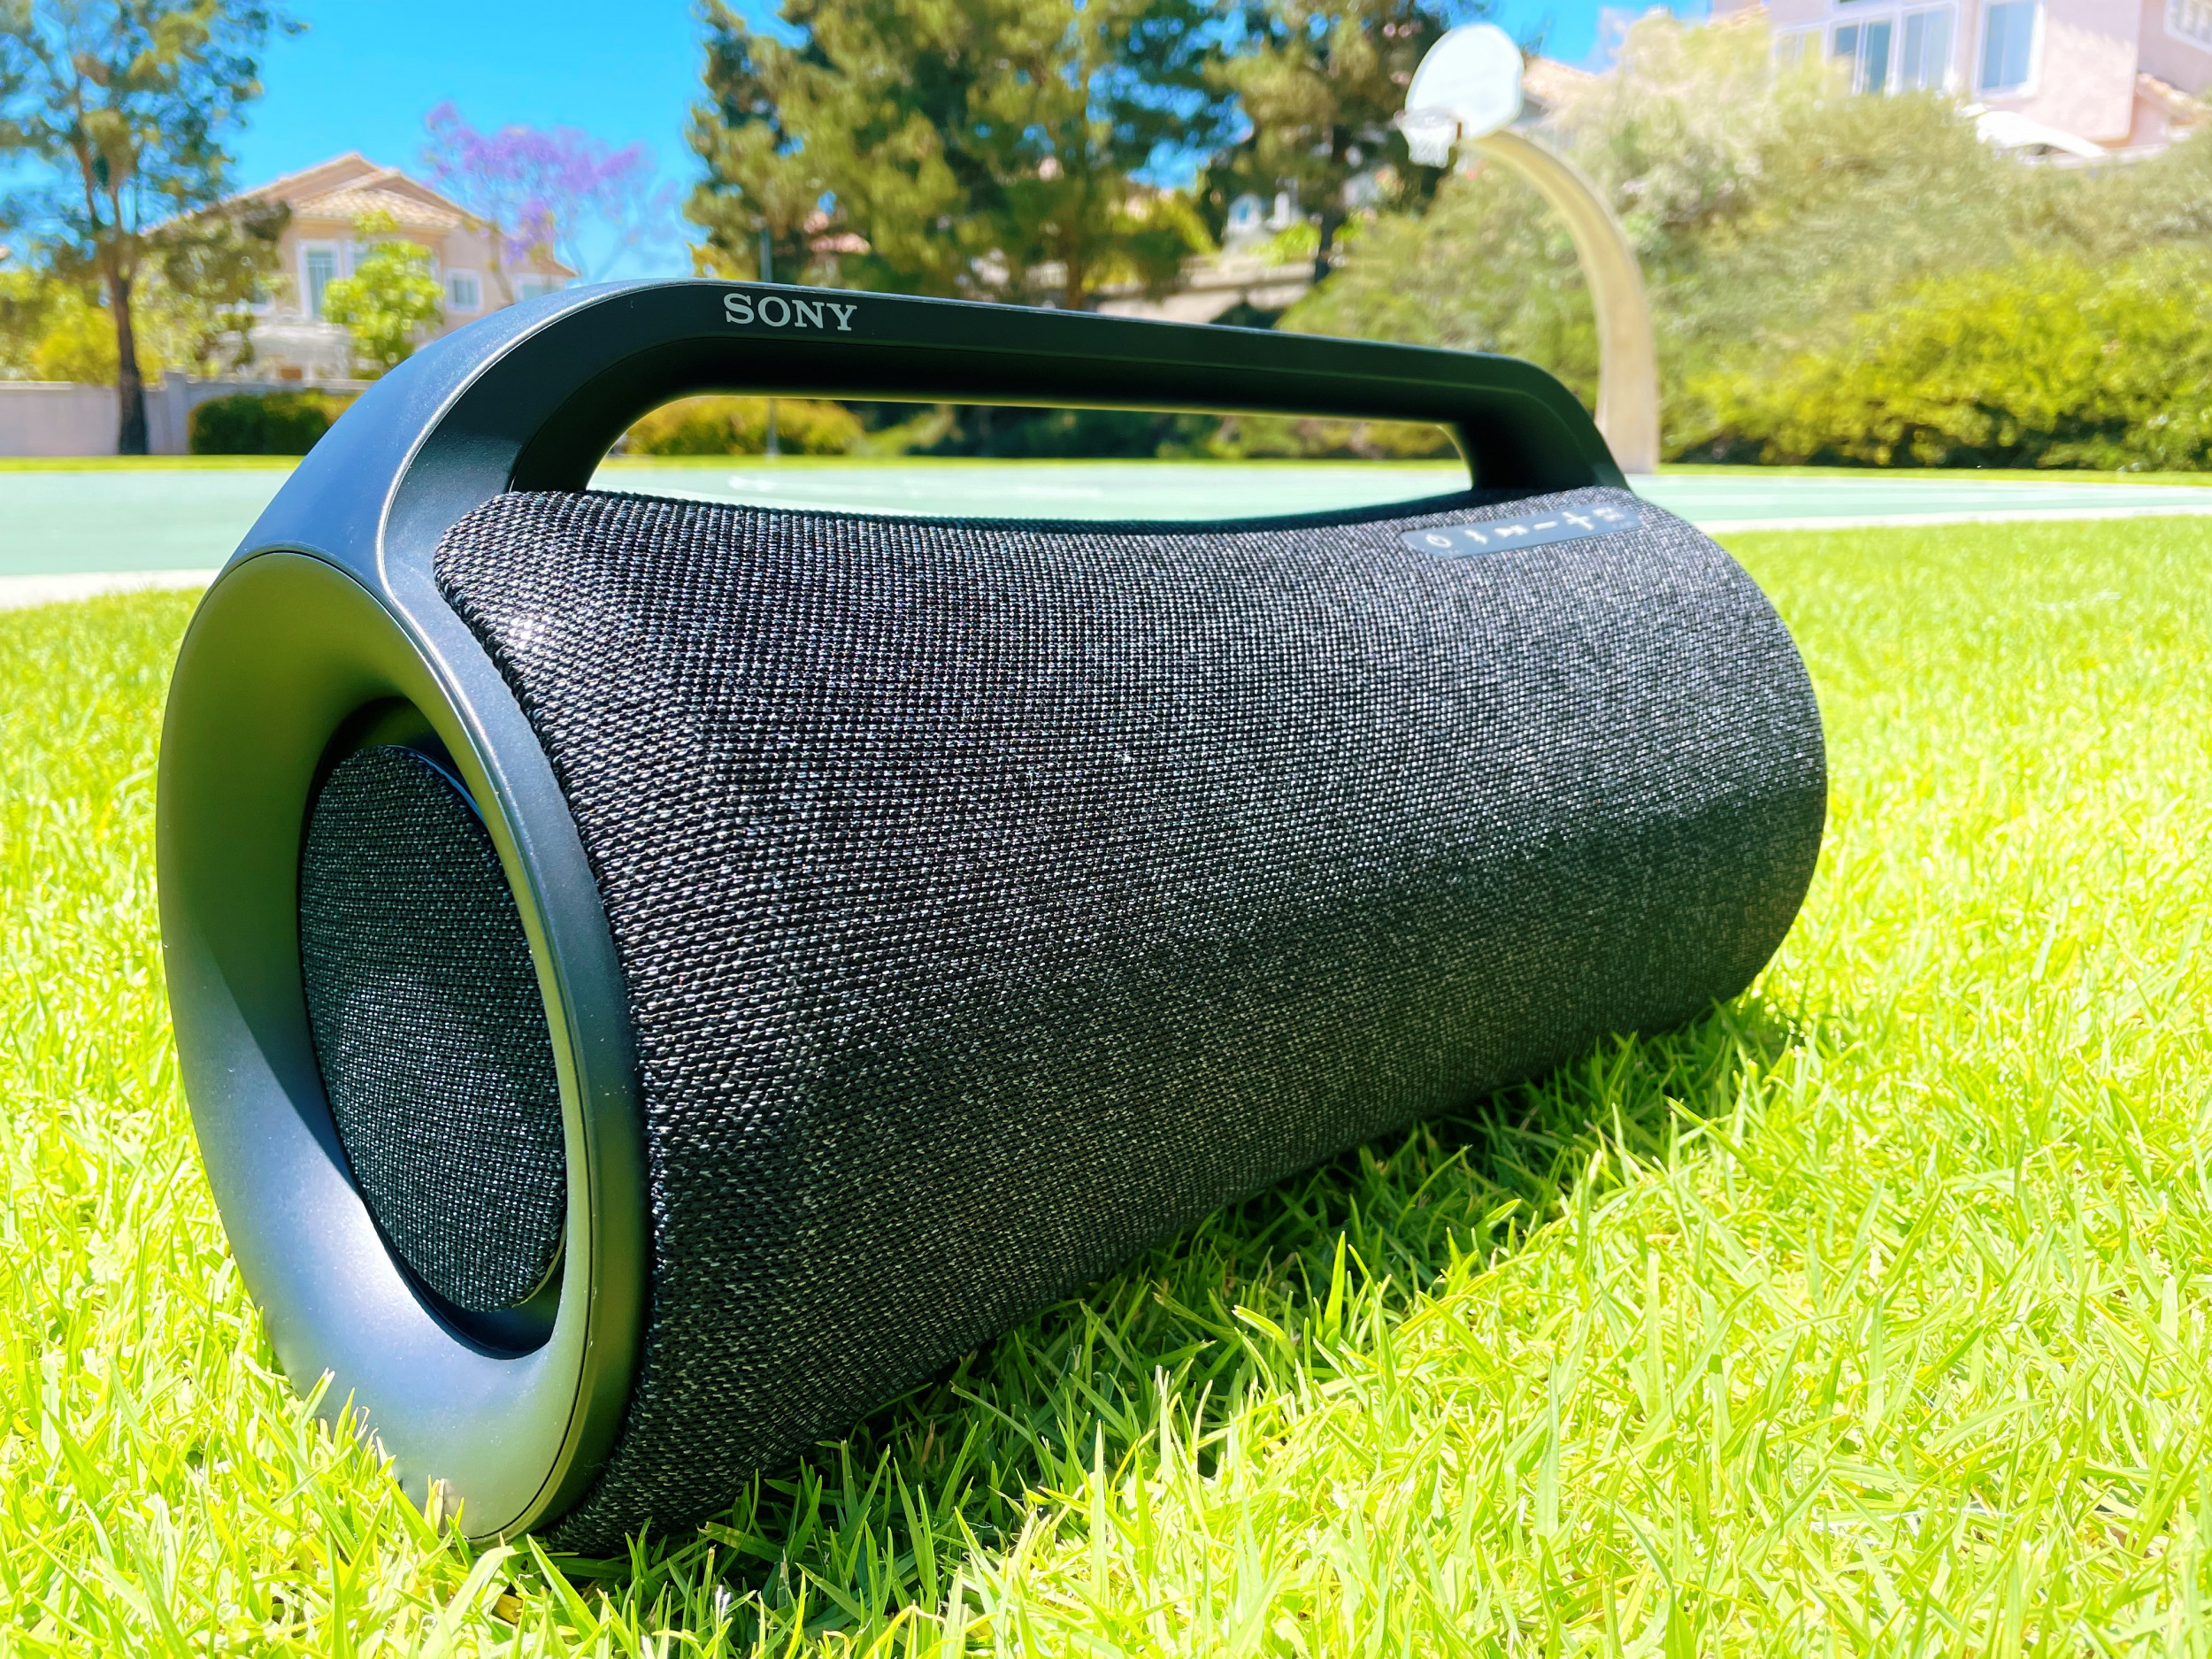 Sony SRS-XG500 X-Series Speaker Review: A Modern Boombox Perfect